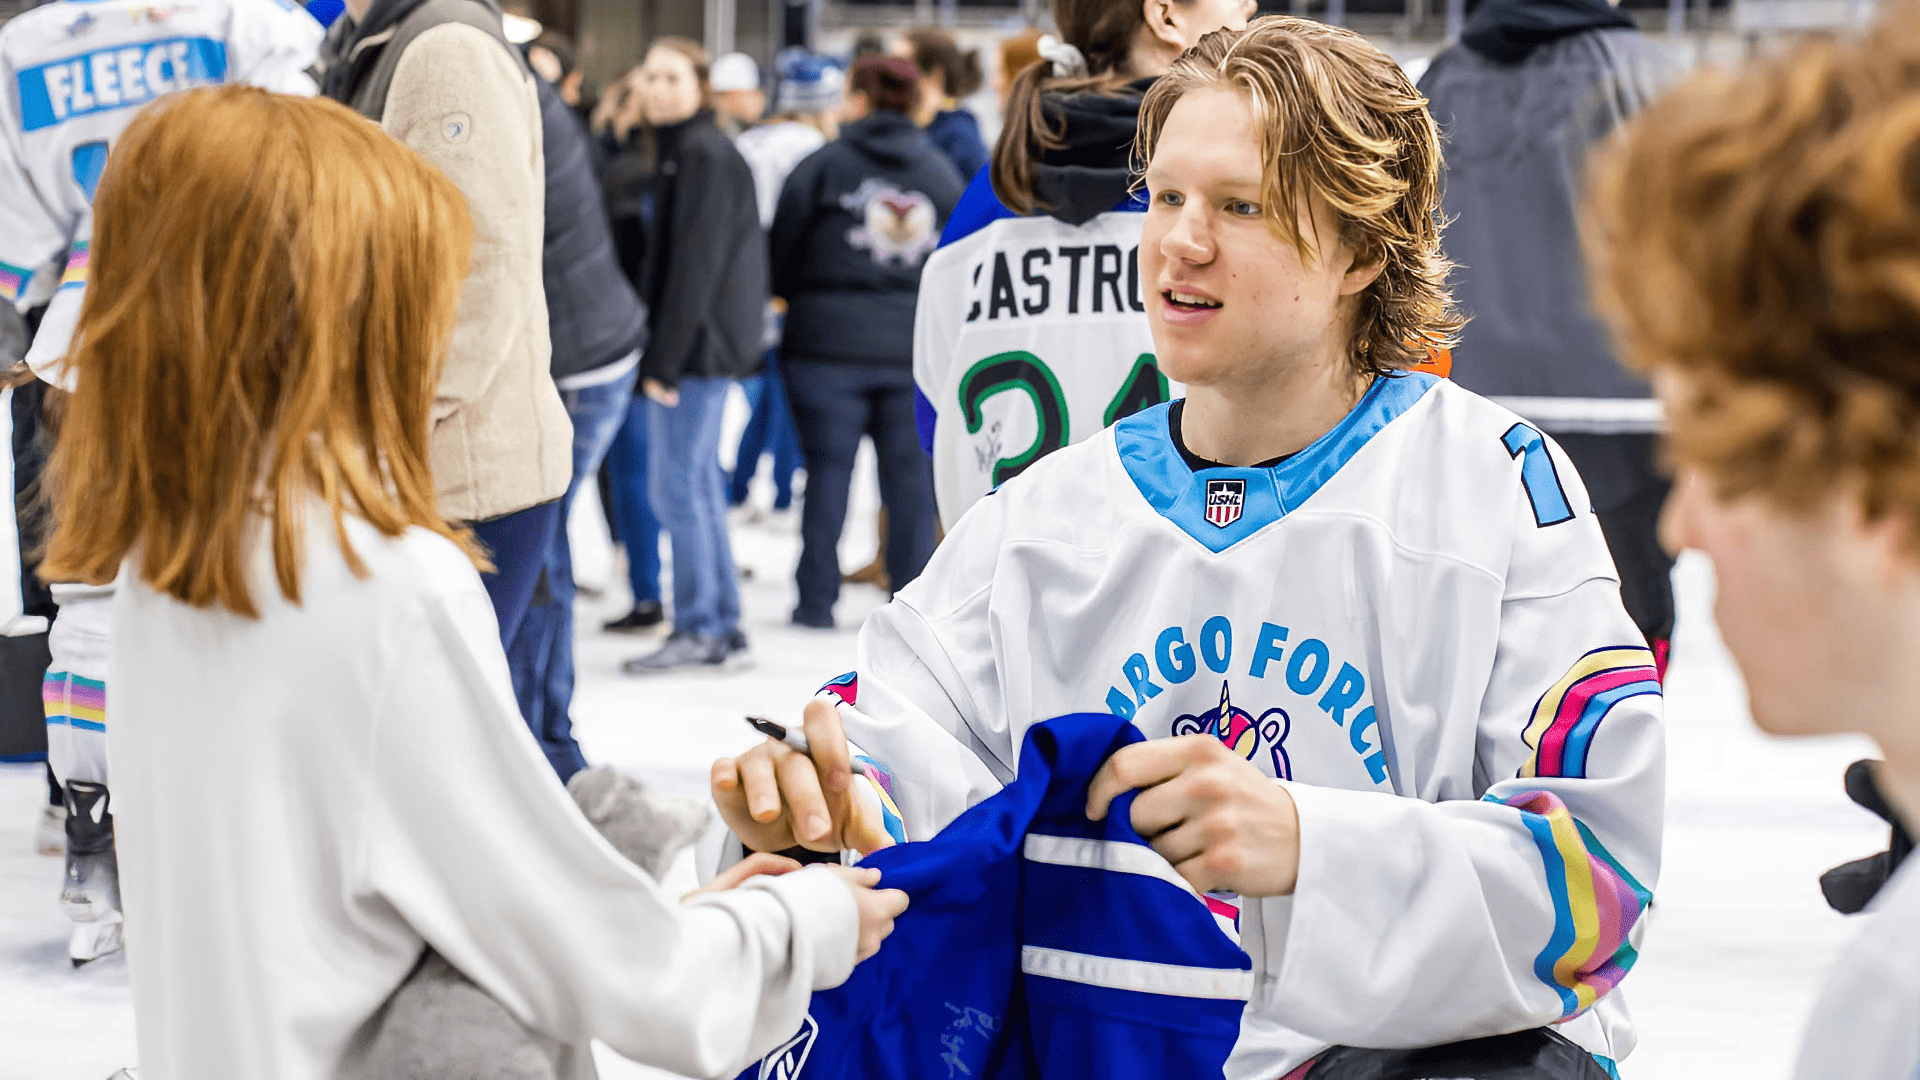 The Fargo Force signed autographs for fans at the 7th Annual Sanford Children's Night